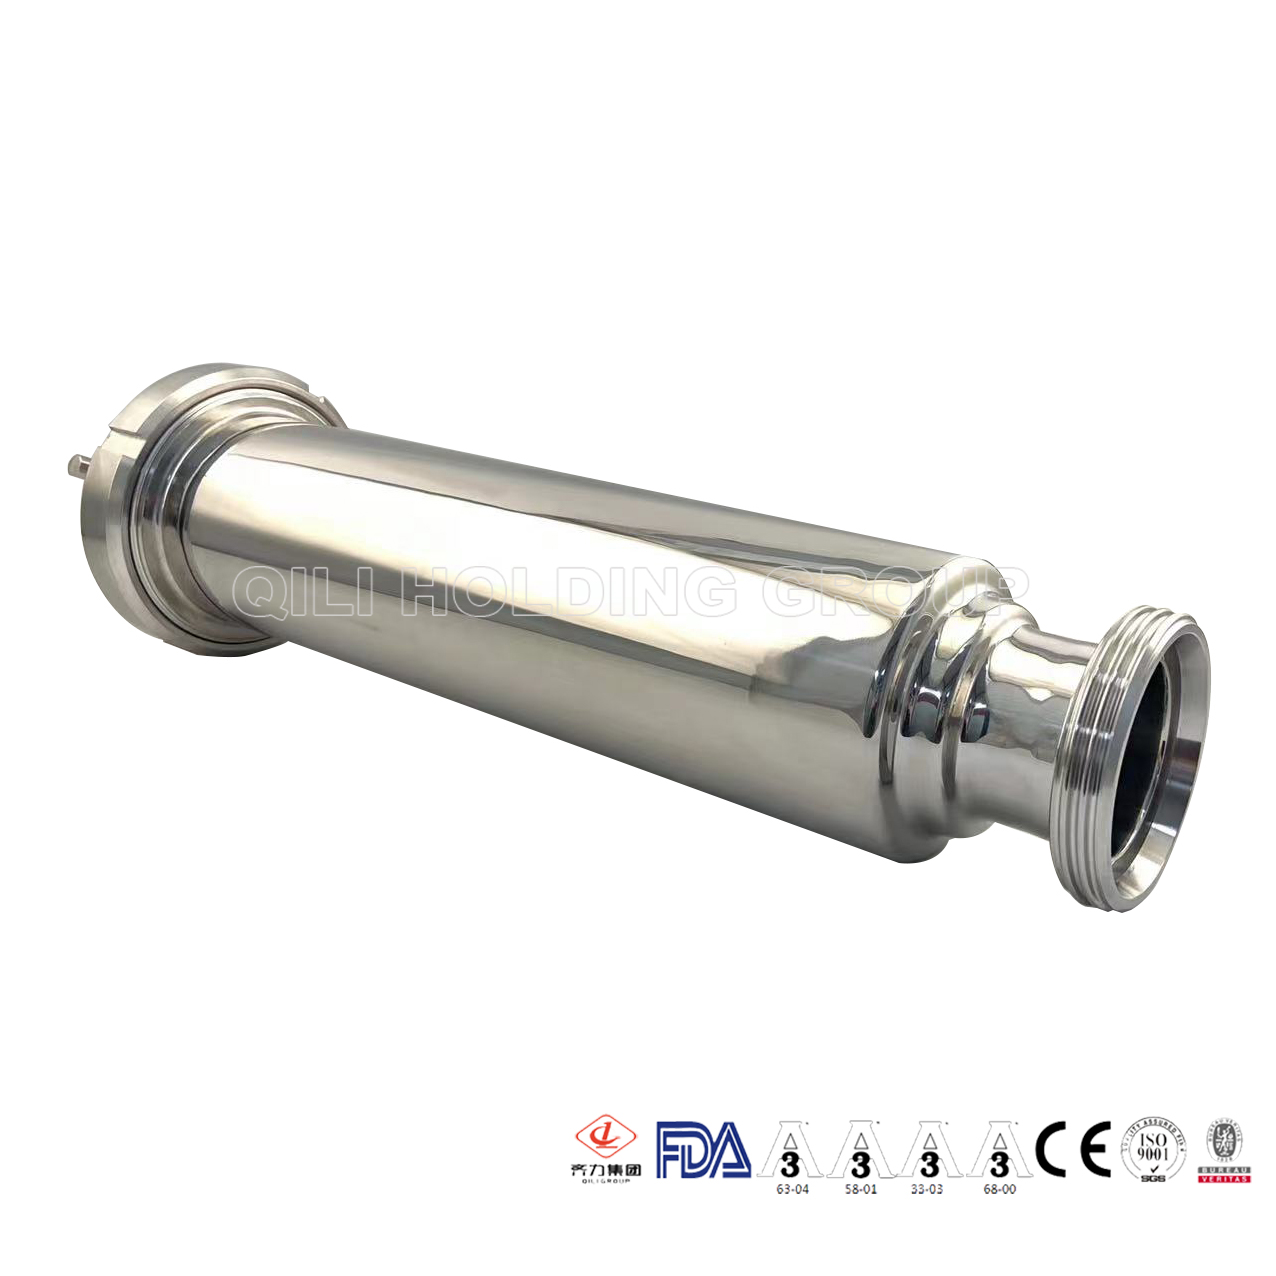 hygienic Flow Control threaded Angle Type Filter